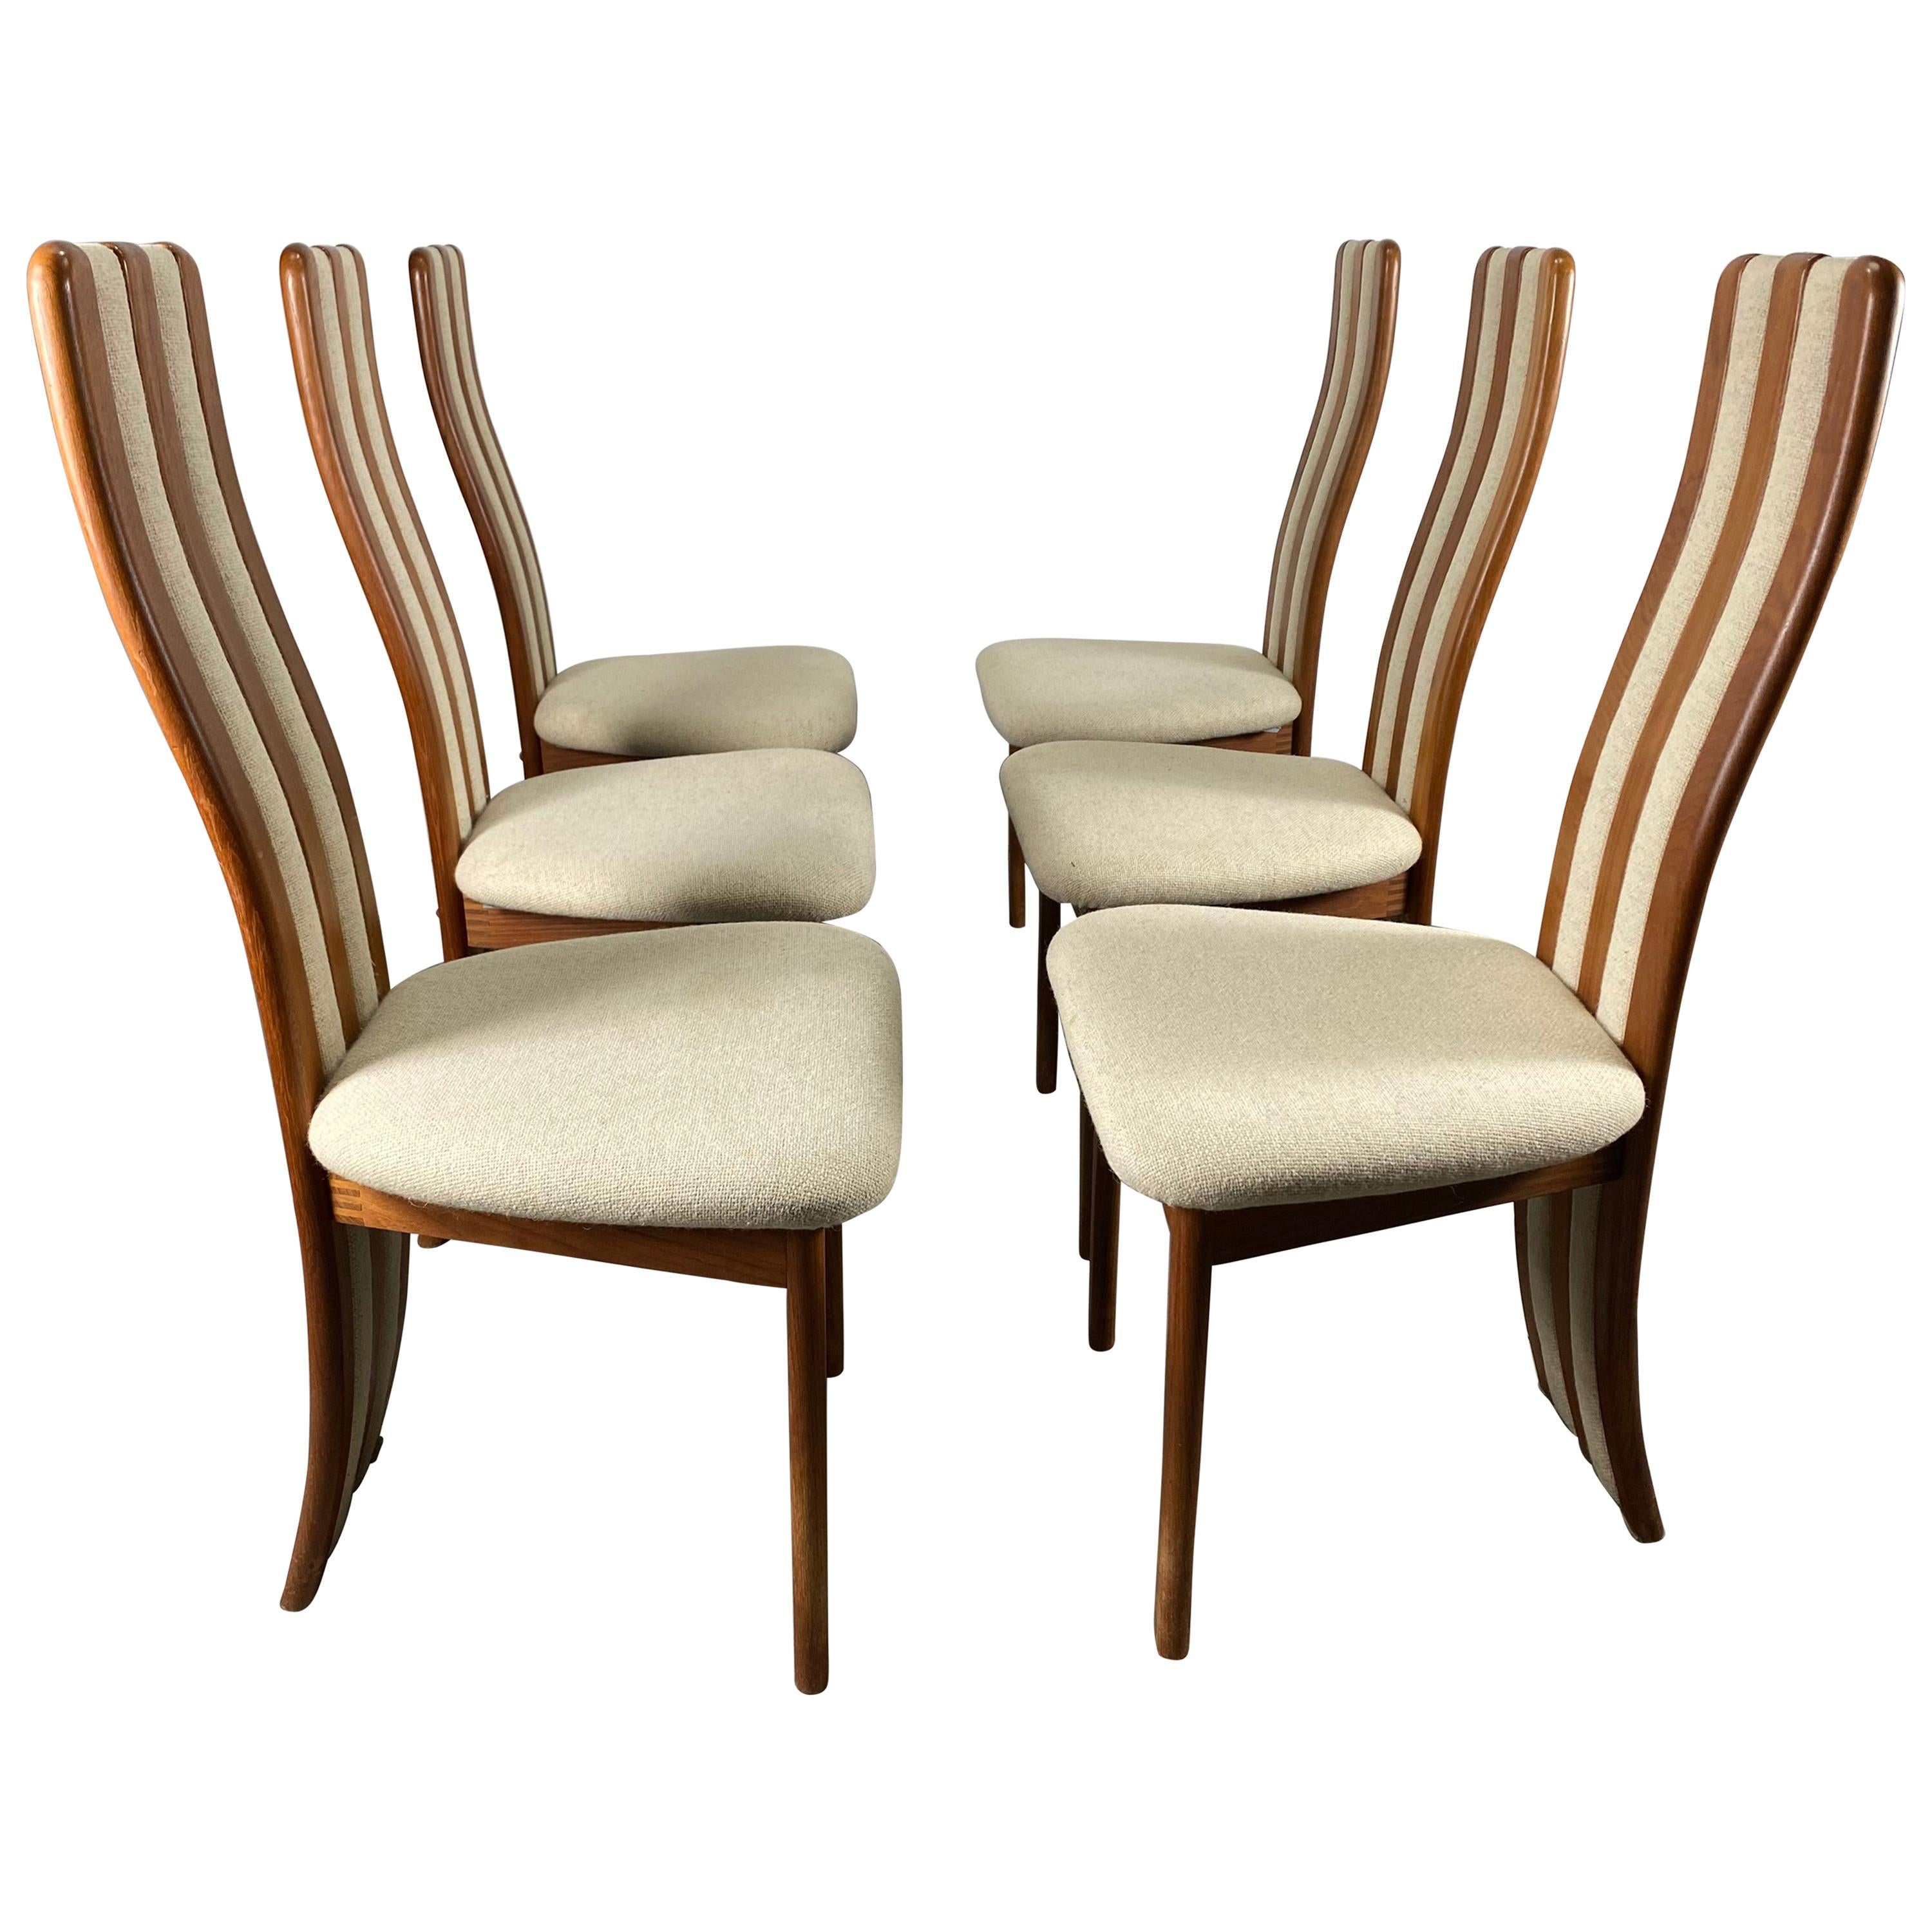 Set of 6 Teak and Fabric High Back Dining Chairs by Korup Stolefabrik / Denmark